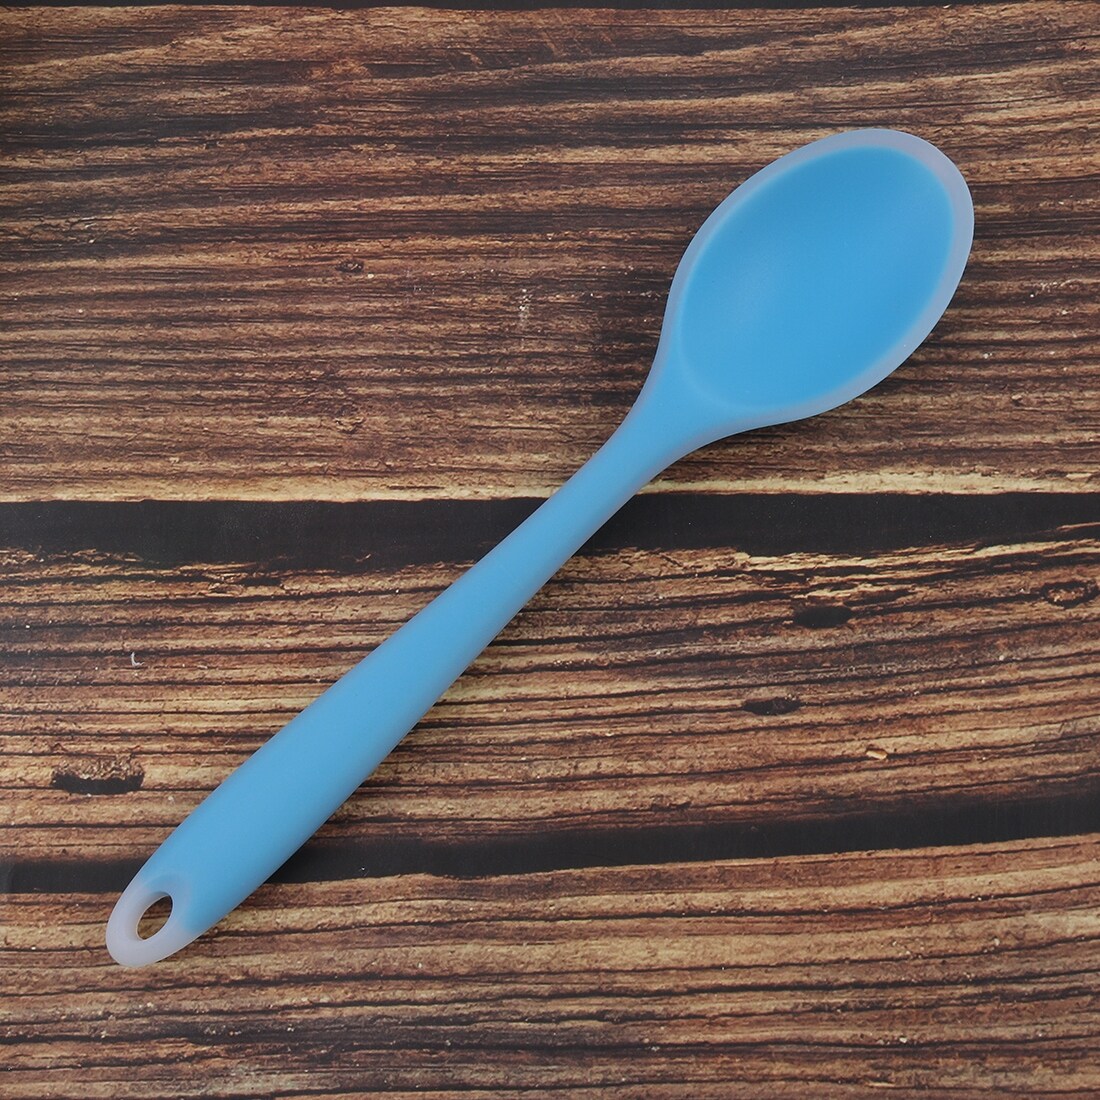 https://ak1.ostkcdn.com/images/products/is/images/direct/e6fa69e4ff9316ec131599afef73df3765a9975c/Silicone-Dinner-Dessert-Spoon-Serving-Eating-Utensil.jpg